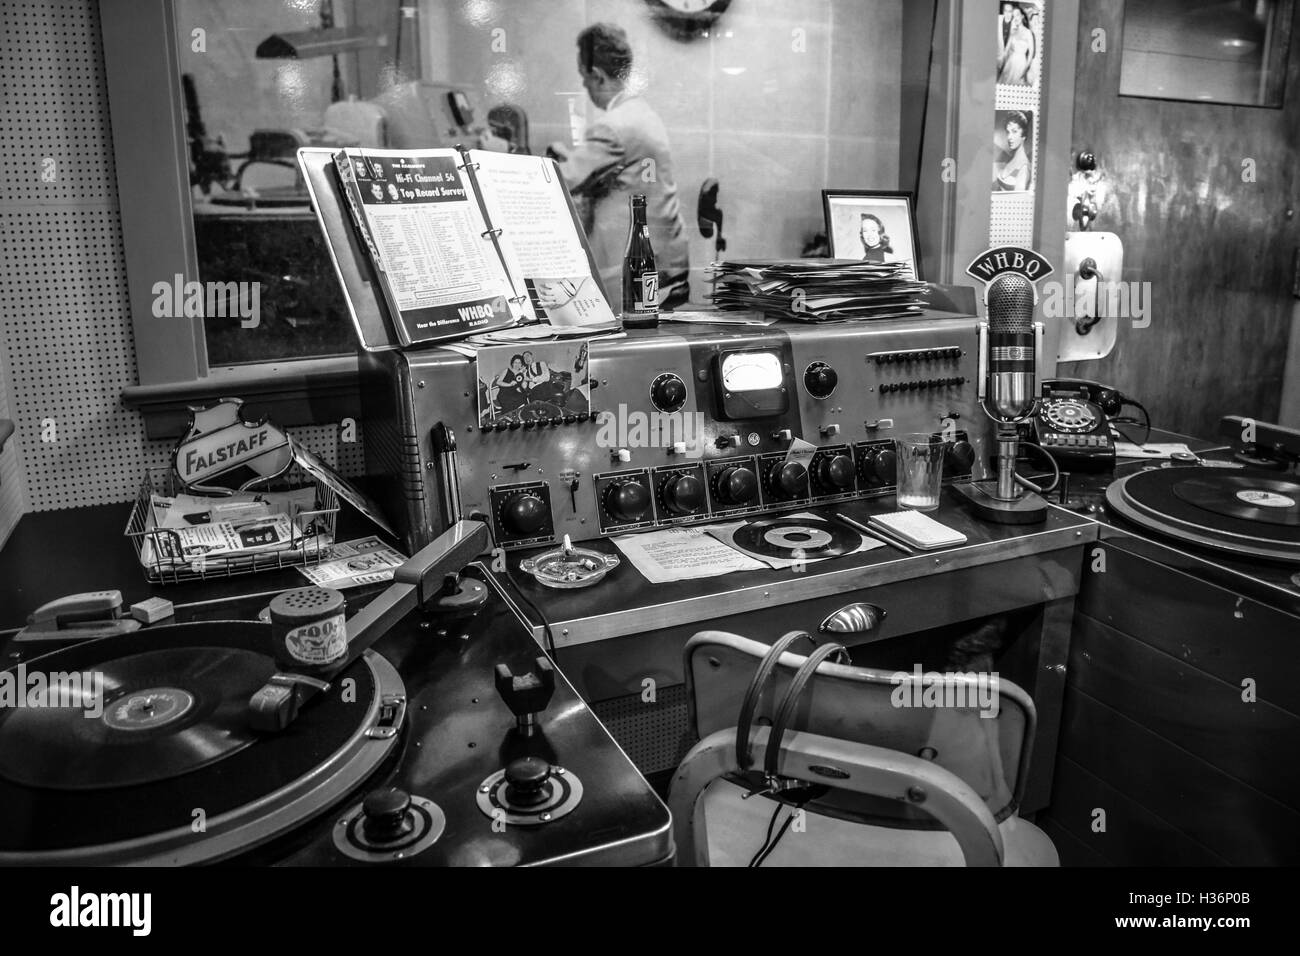 A 'frozen in time' look inside Sam Phillips' vintage recording booth full of equipment & turntables & photos at Sun Records Studio in Memphis, TN, Stock Photo